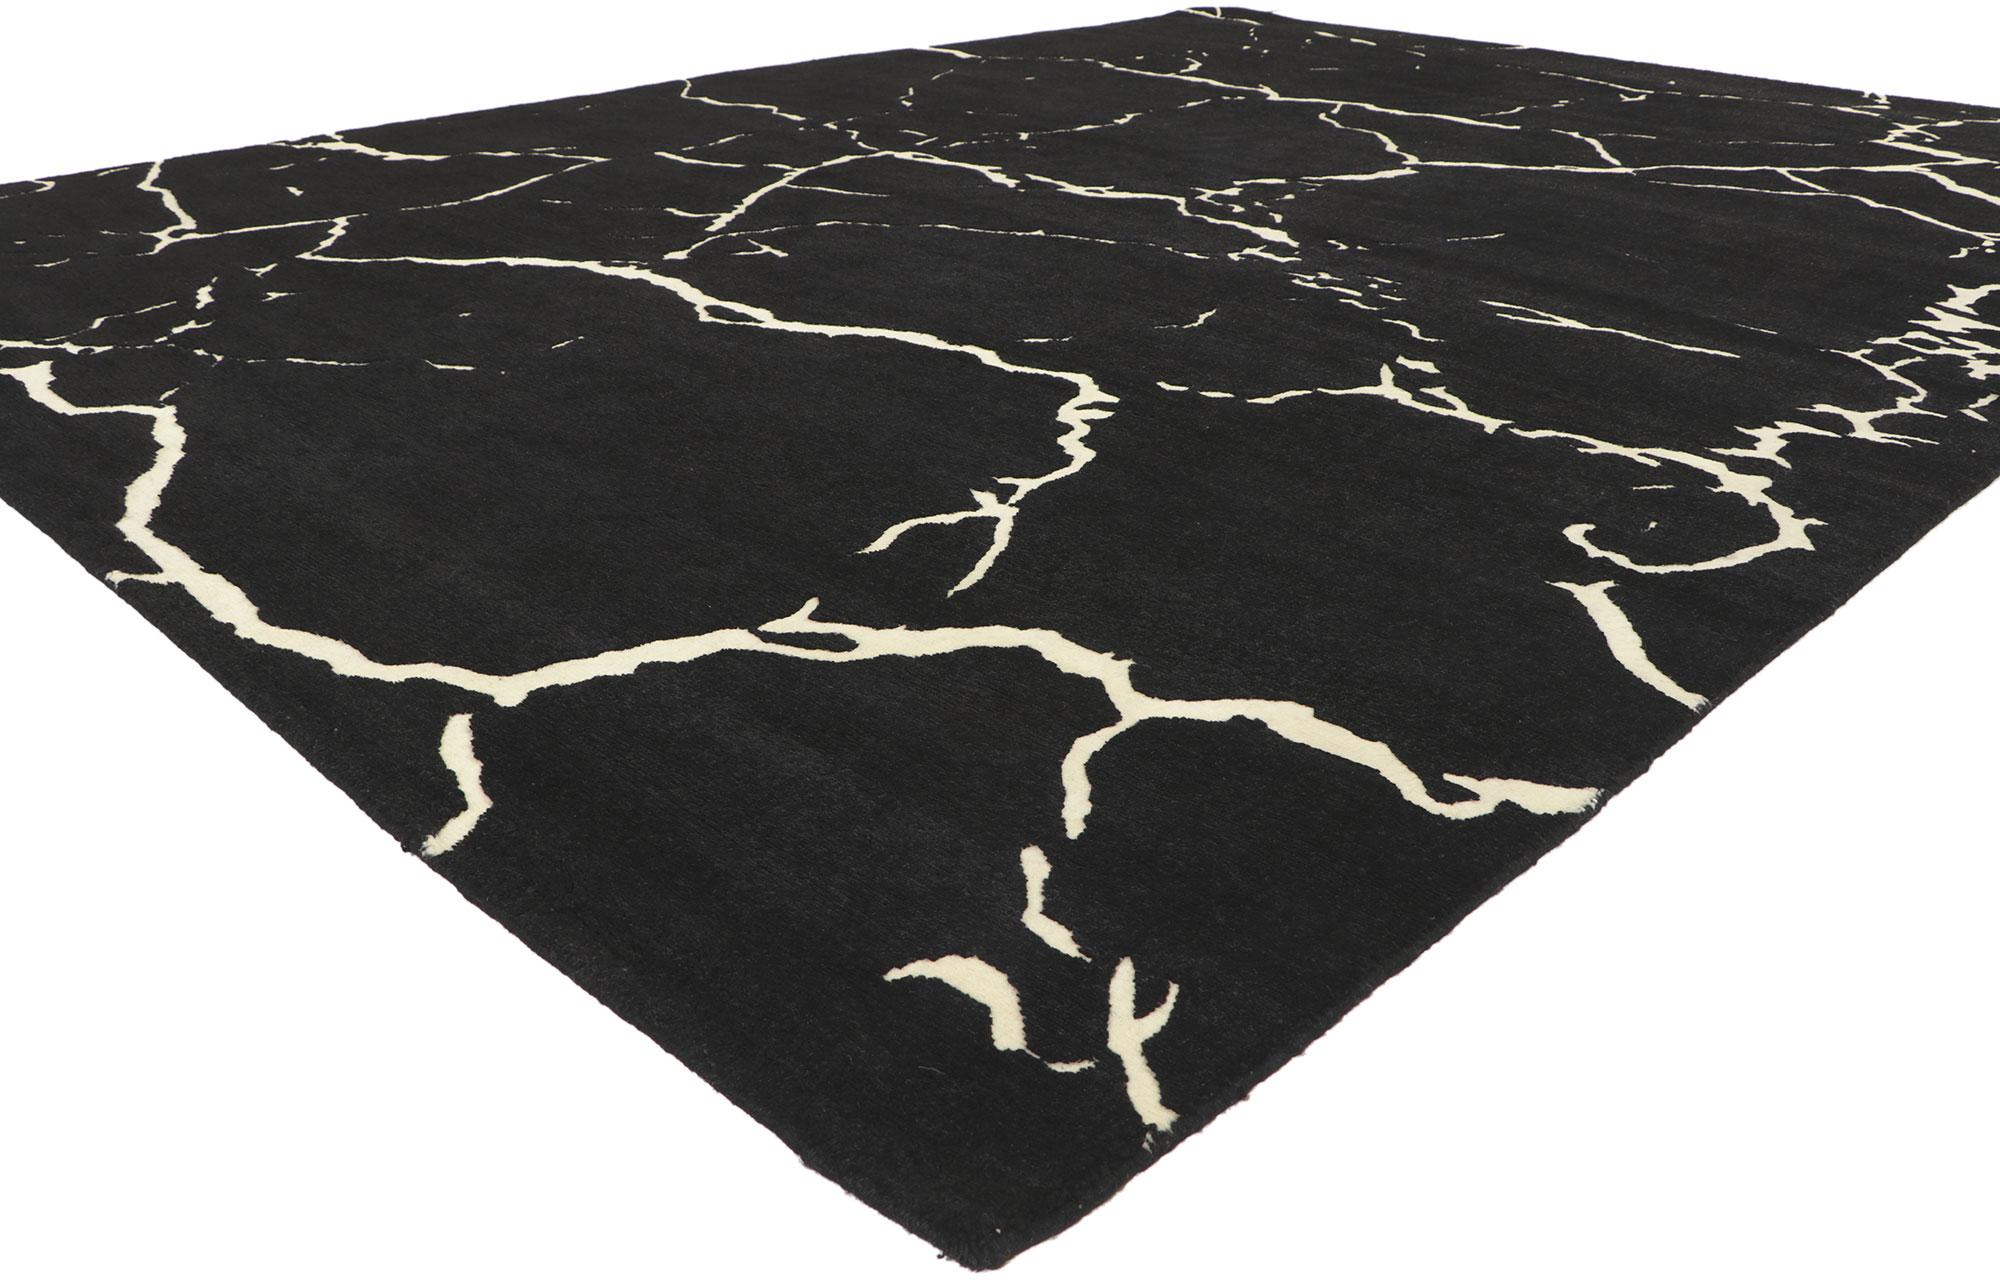 30878 New Contemporary Abstract Rug with Biophilic Design, 09'02 x 12'00
Showcasing an abstract biophilic design with incredible detail and texture, the hand-knotted wool contemporary rug is a captivating vision of woven beauty. The mesmerizing